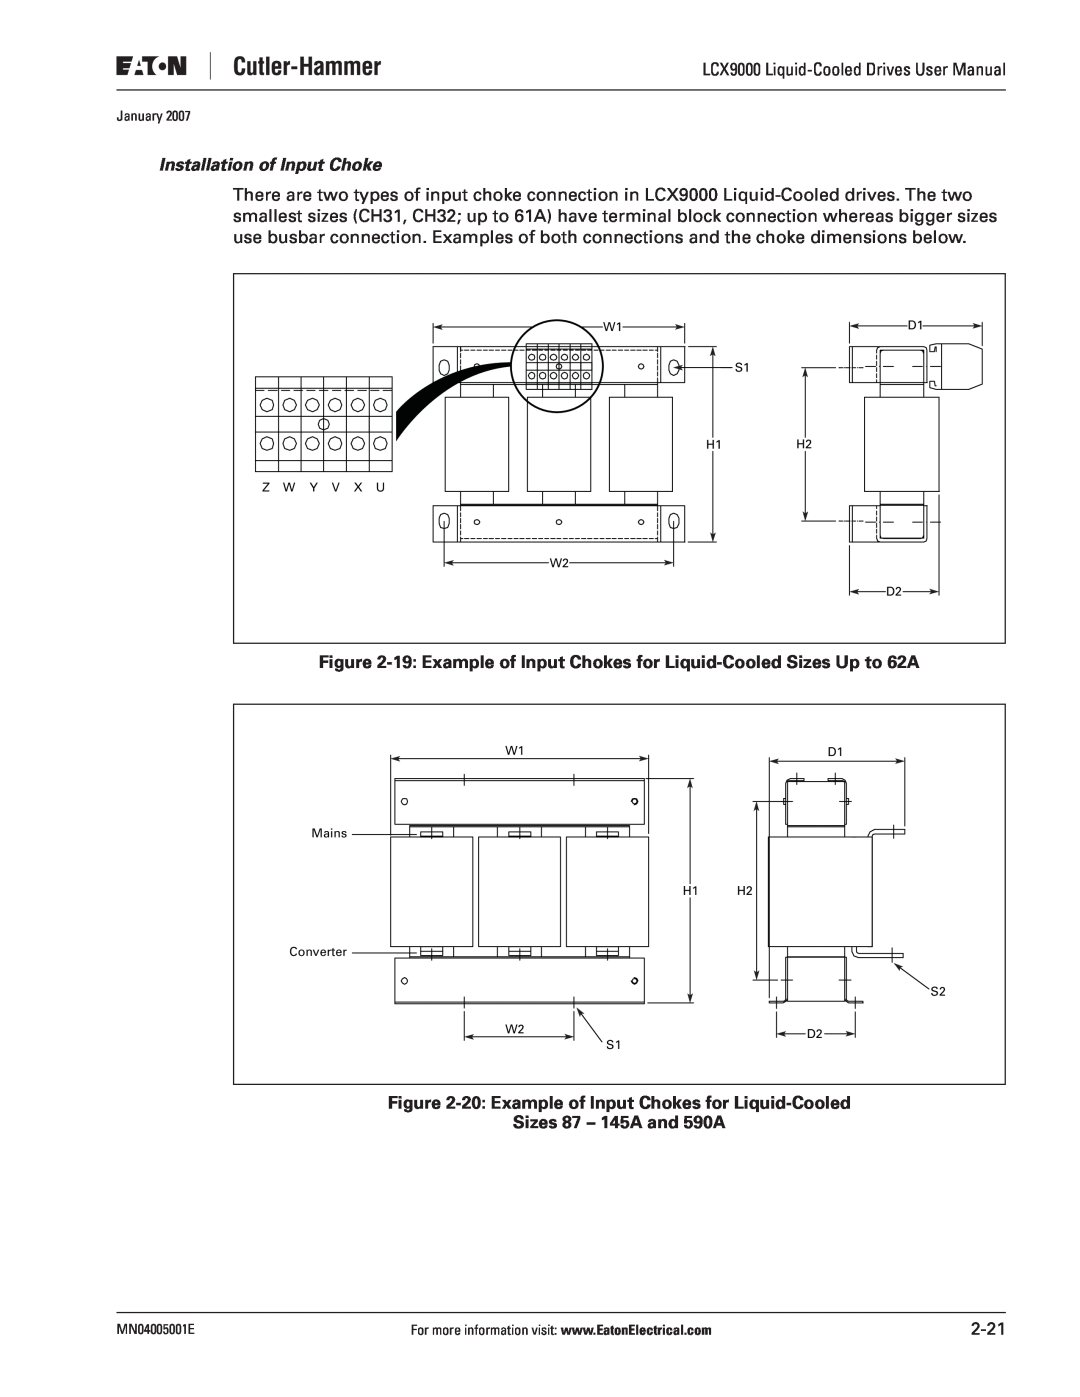 J. T. Eaton LCX9000 user manual Installation of Input Choke, 19 Example of Input Chokes for Liquid-Cooled Sizes Up to 62A 